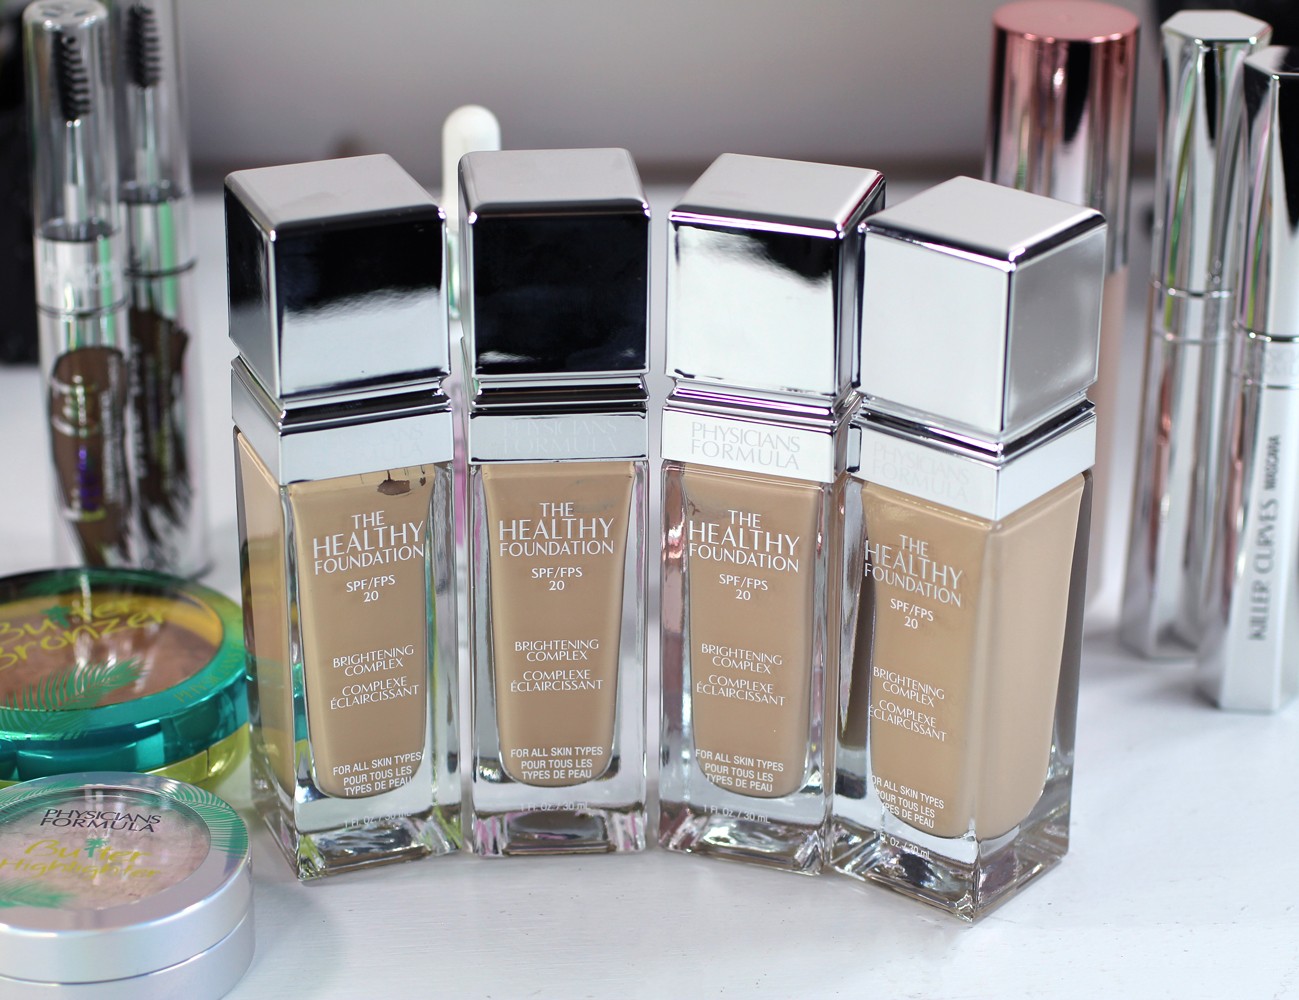 Physicians Formula The Healthy Foundation Review